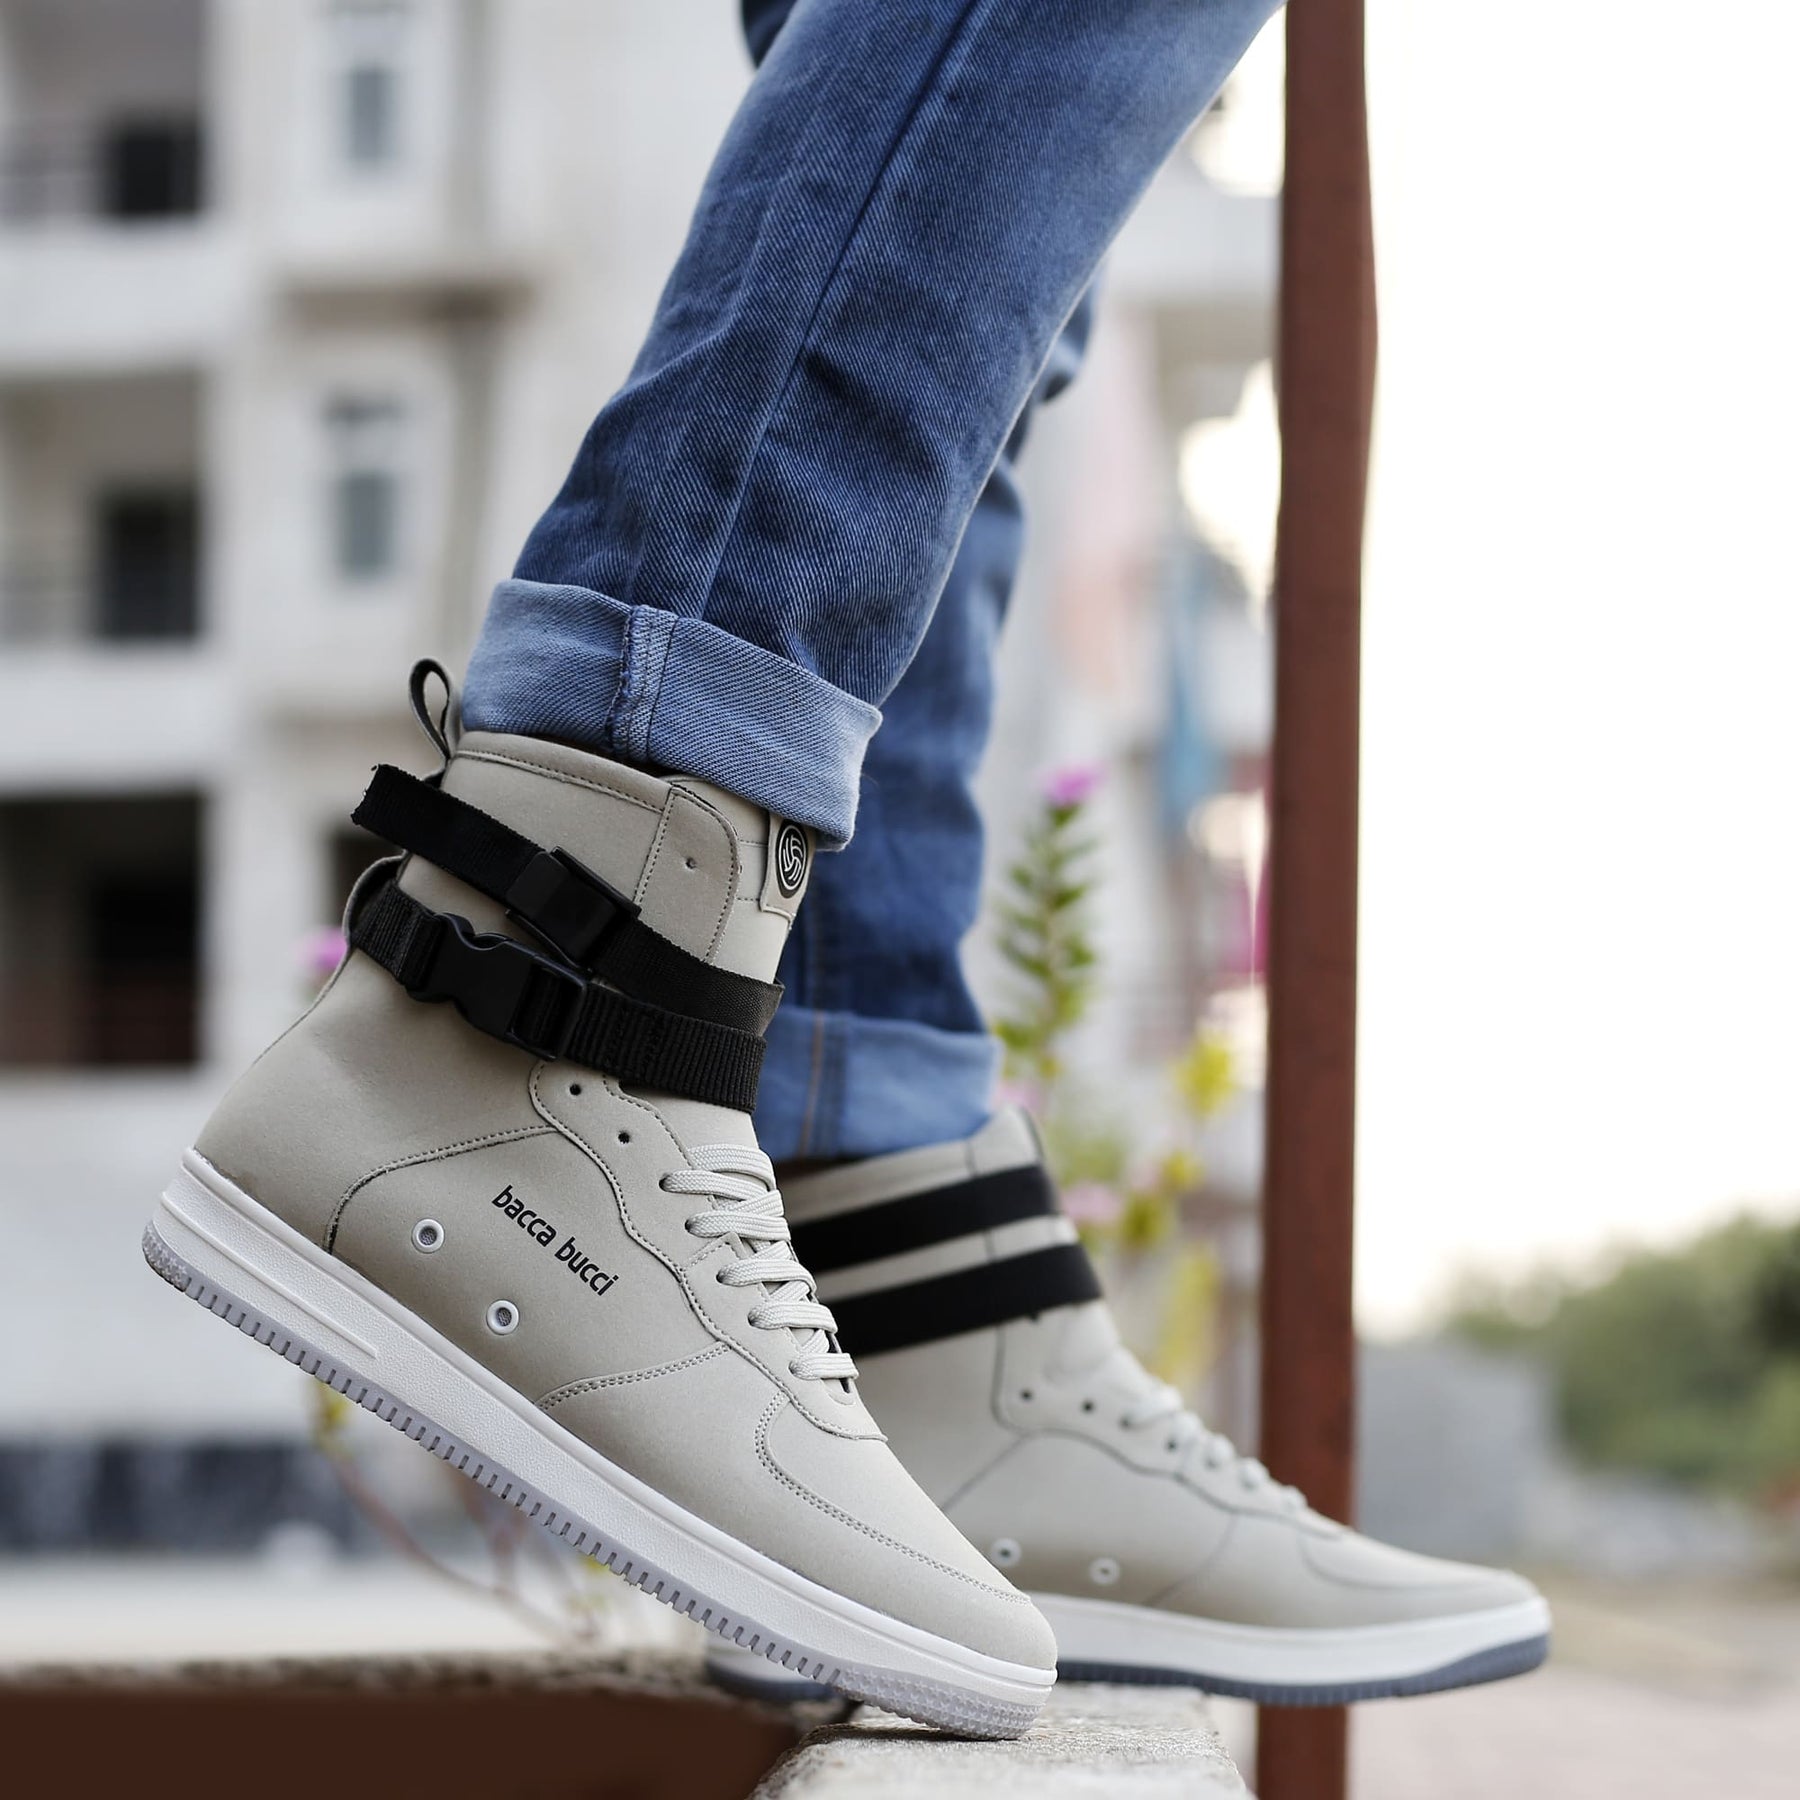 white sneakers for men, white casual shoes, white fashion sneakers for men, white hi top sneakers